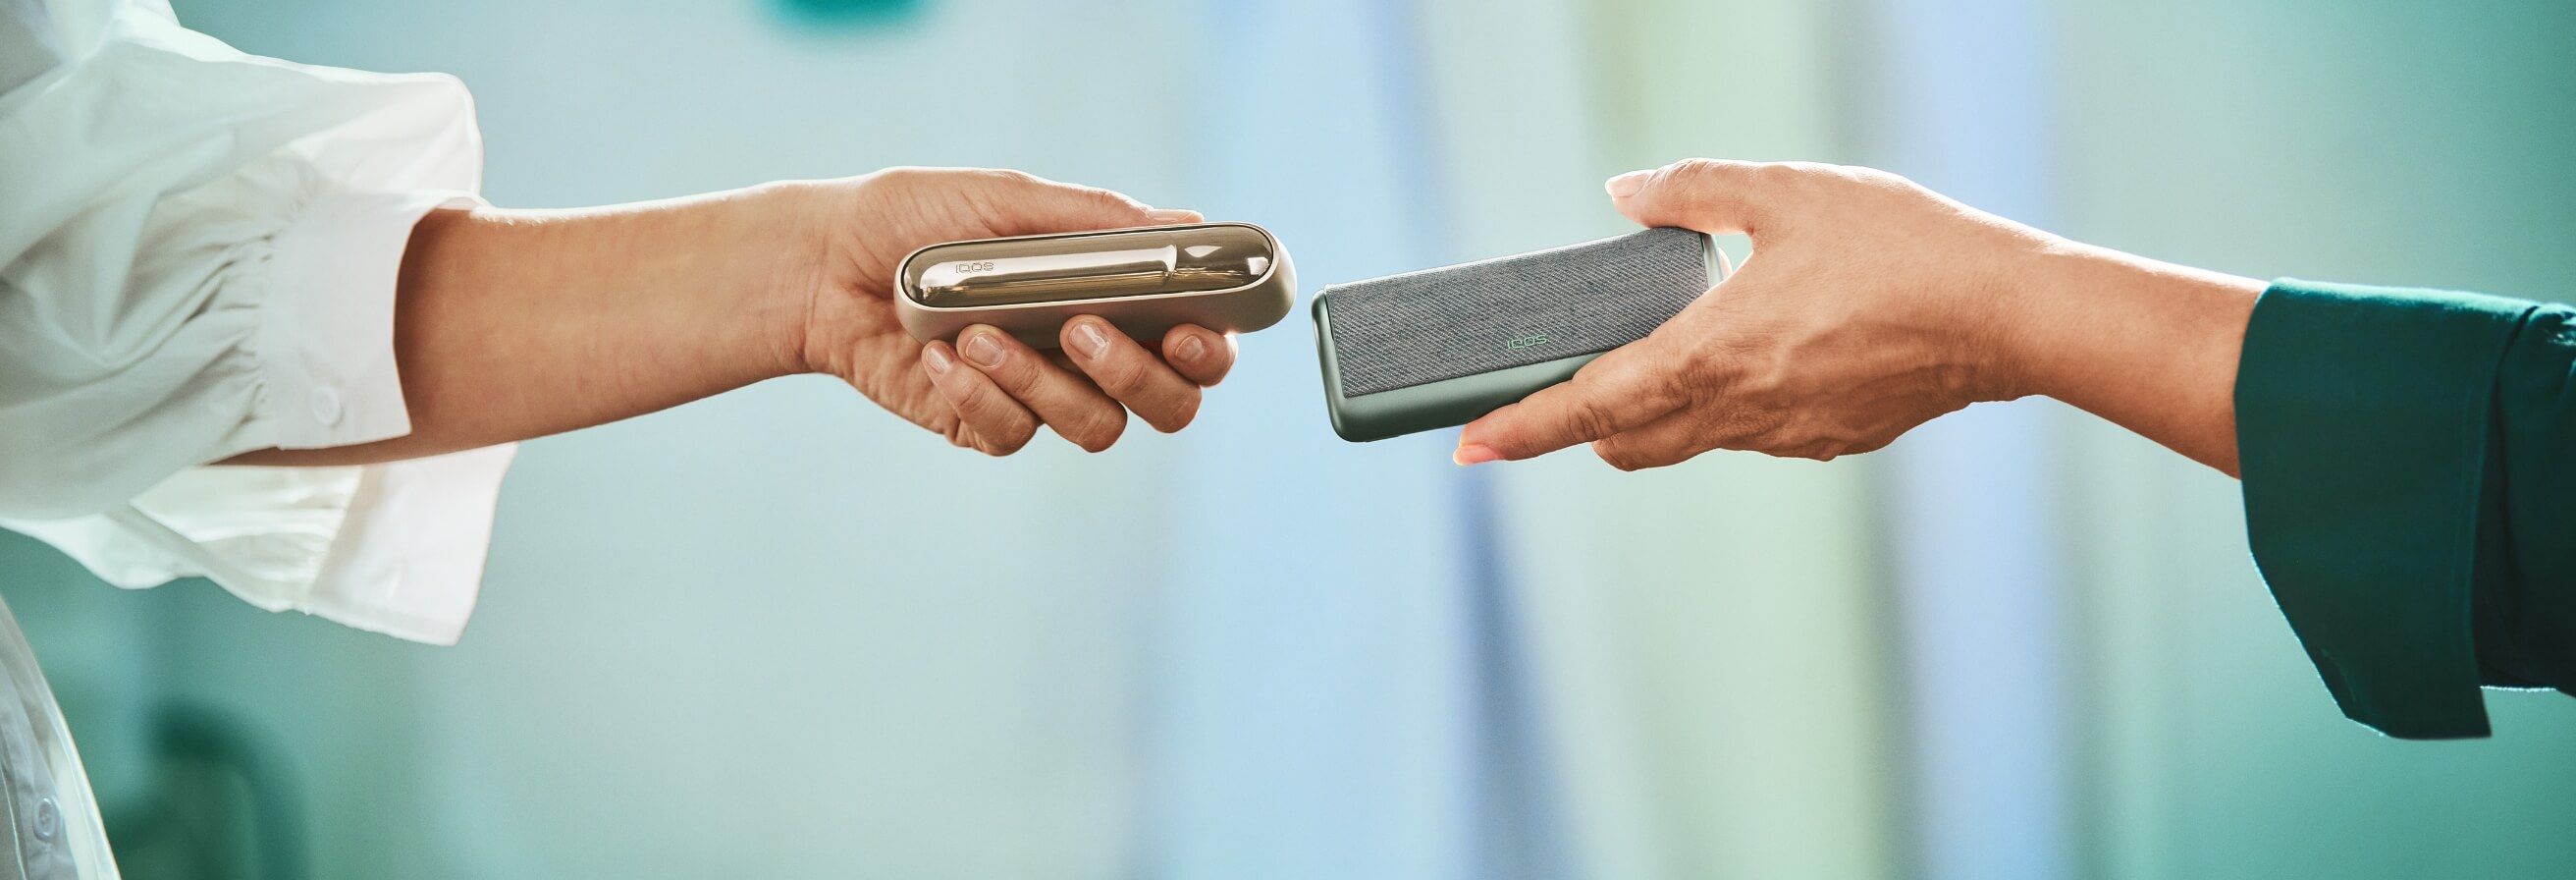 hands holding iqos devices